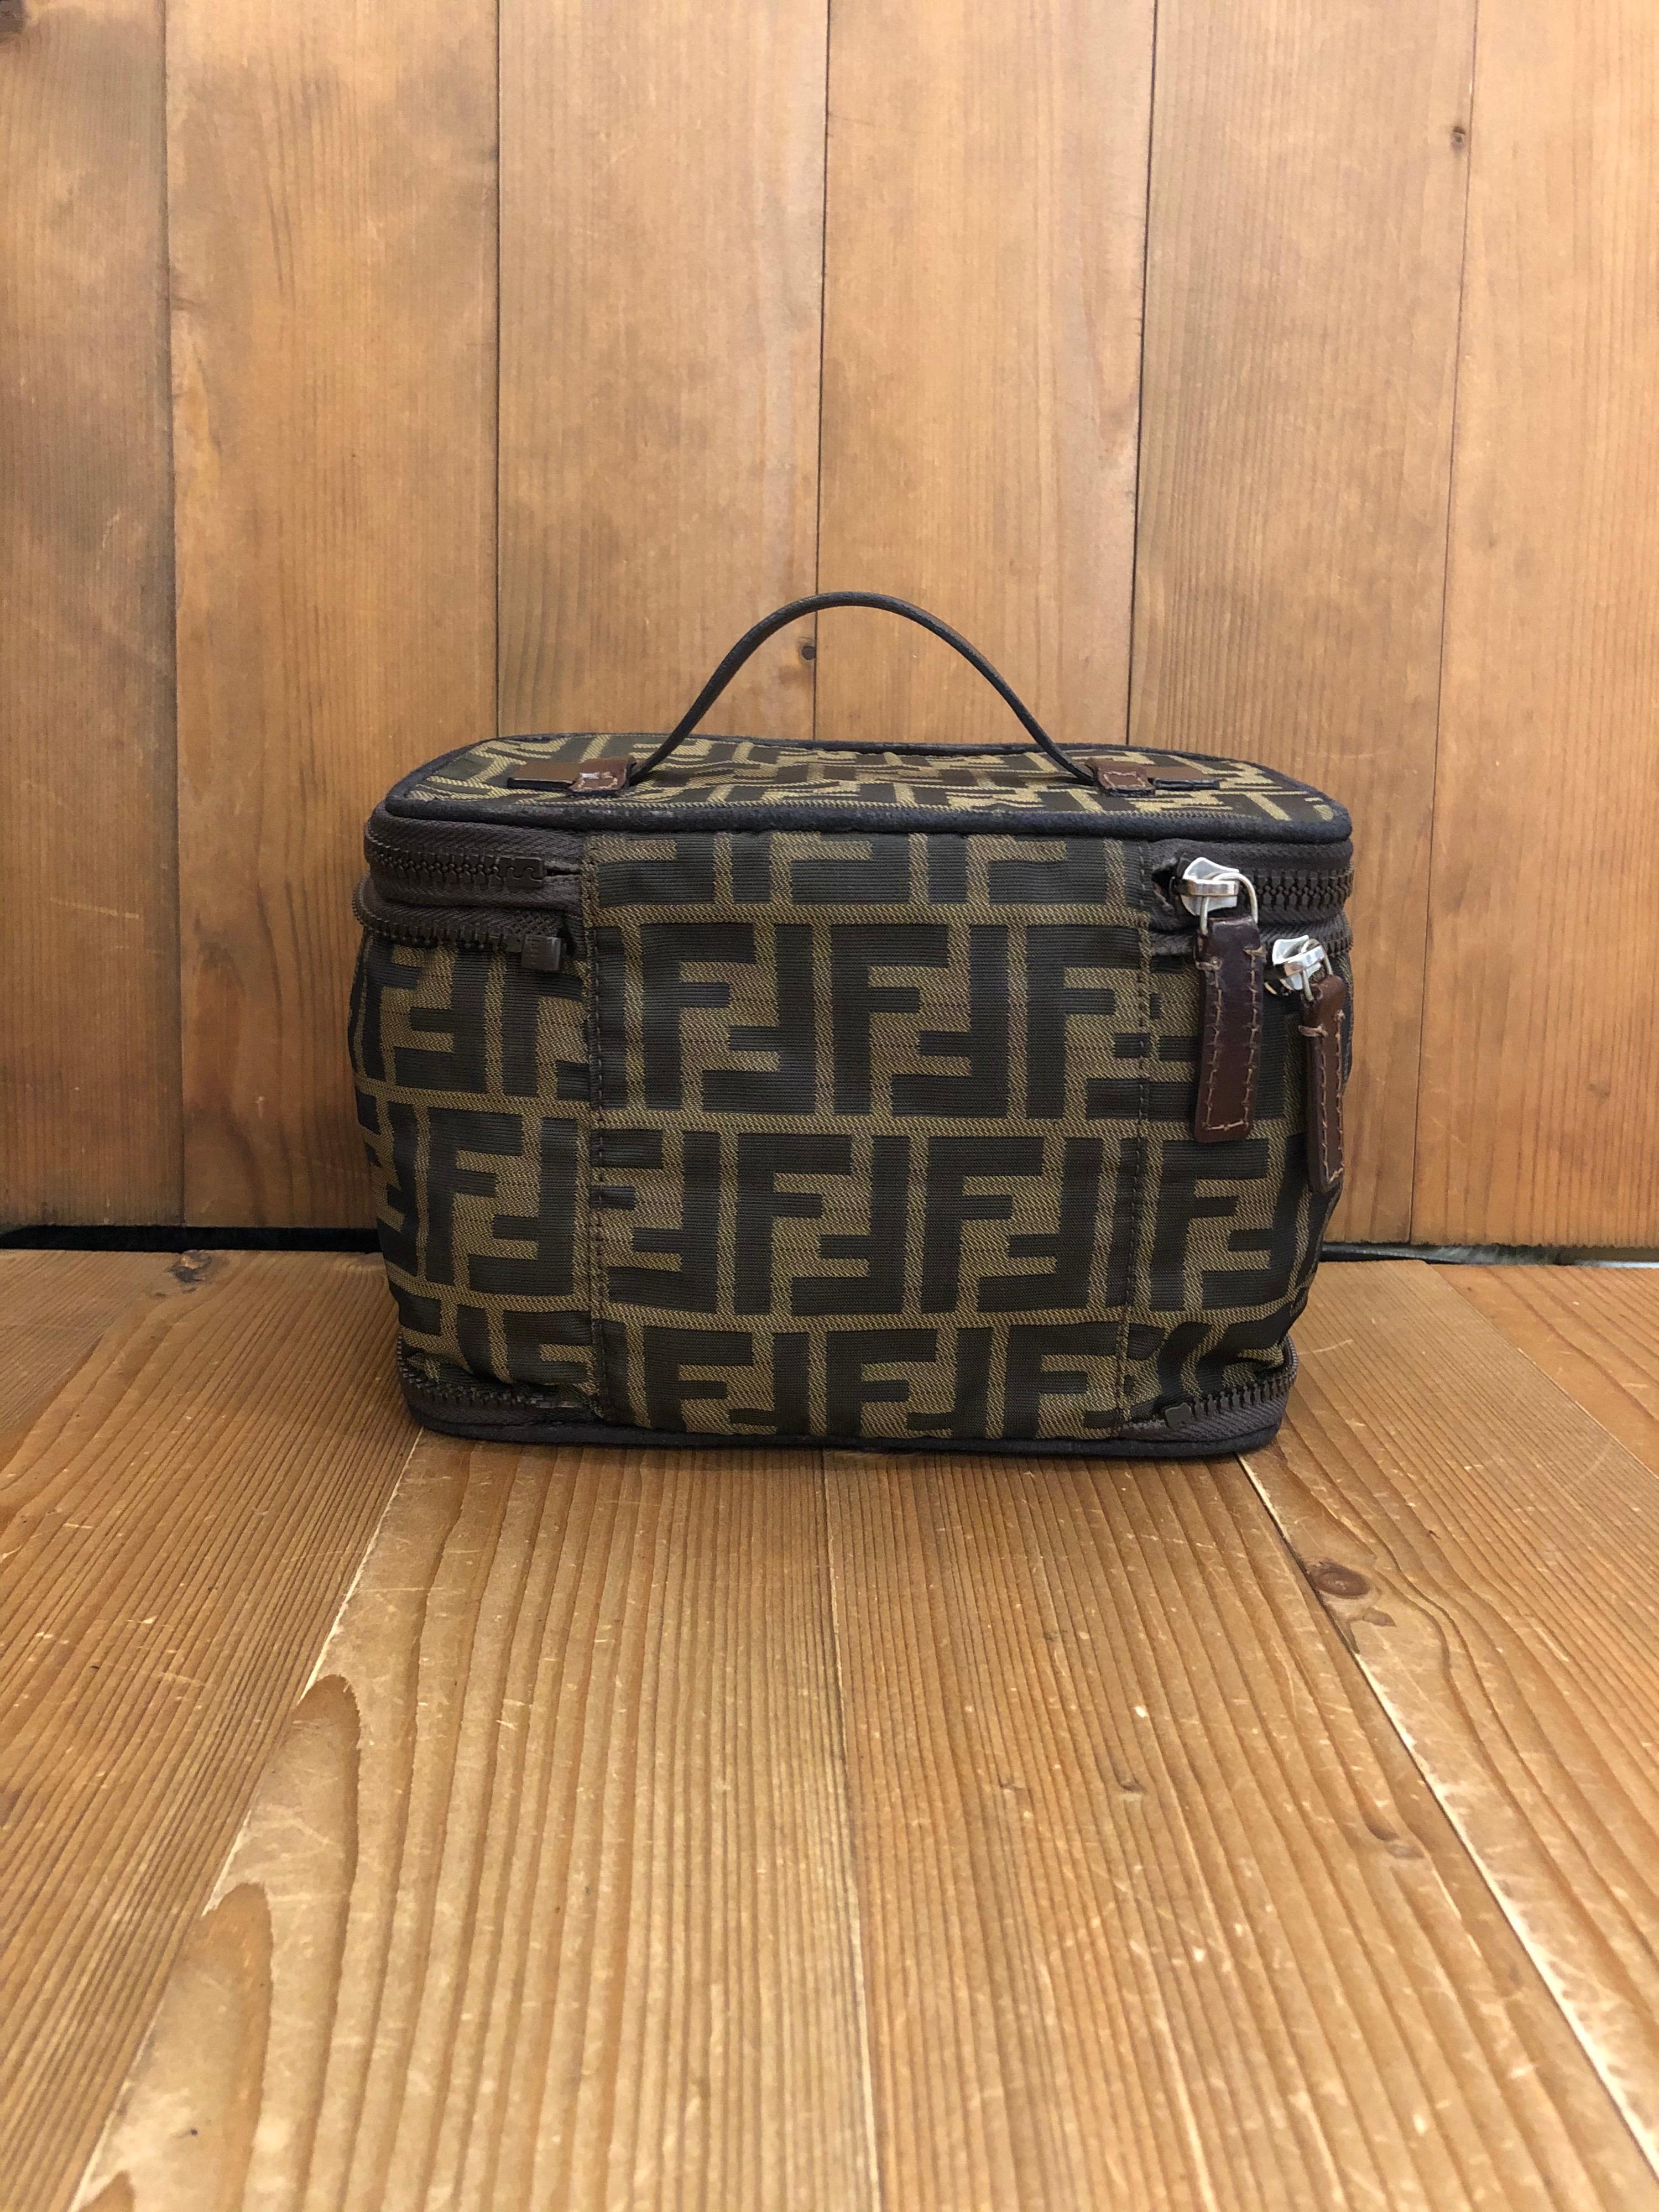 1990s FENDI Brown Zucca Jacquard Foldable Cosmetic Vanity Pouch Handbag 

Material: Jacquard/Leather
Color: Brown
Origin: Italy
Measurements: 8.25